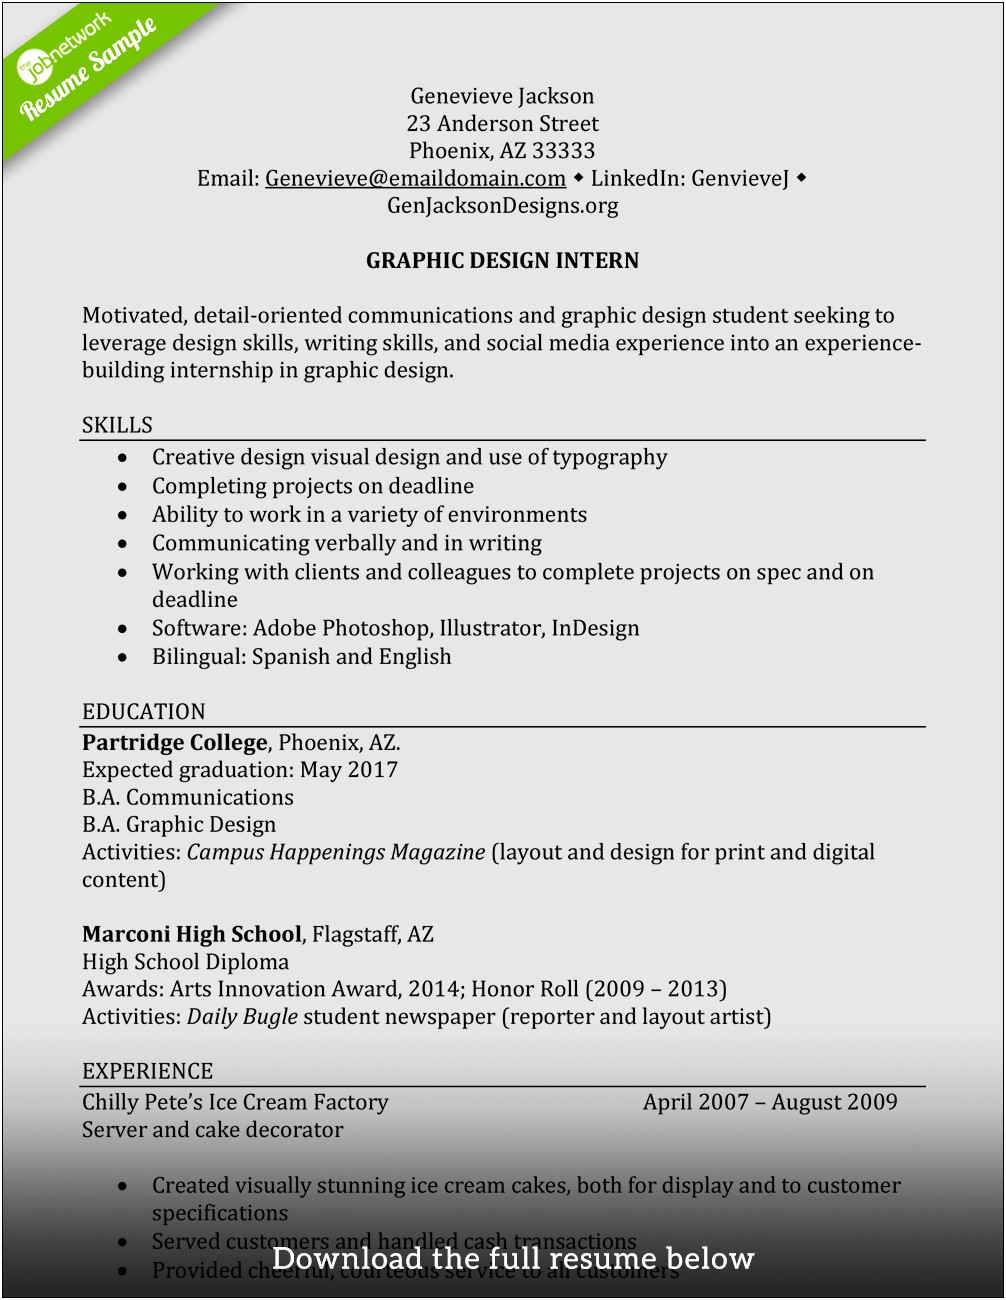 Sample College Resume With No Work Experience